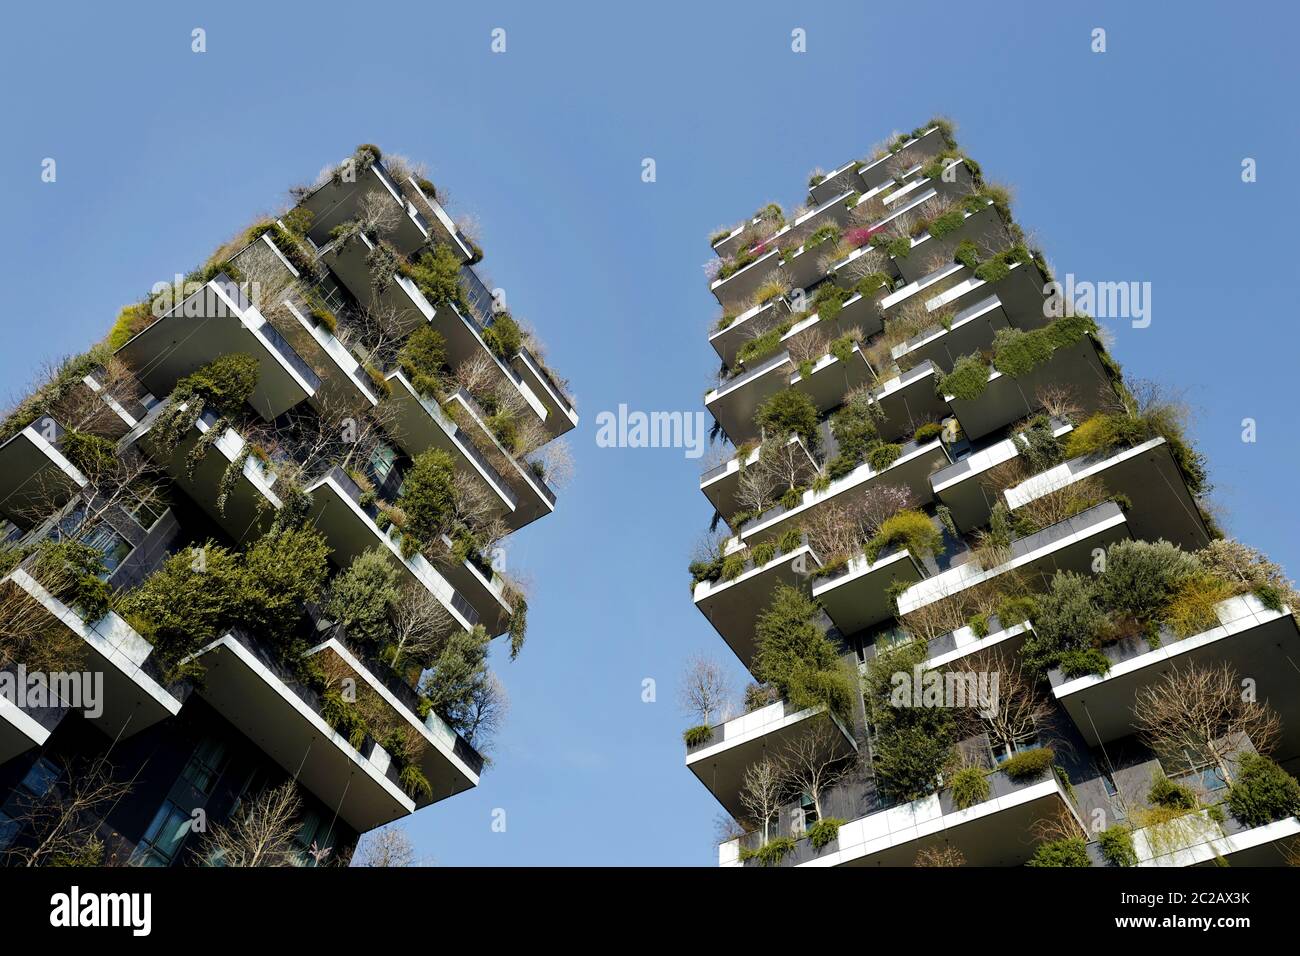 Ecological modern architecture skyscraper, Bosco Verticale, with vertical green wood on the balconies, in Milan. Stock Photo